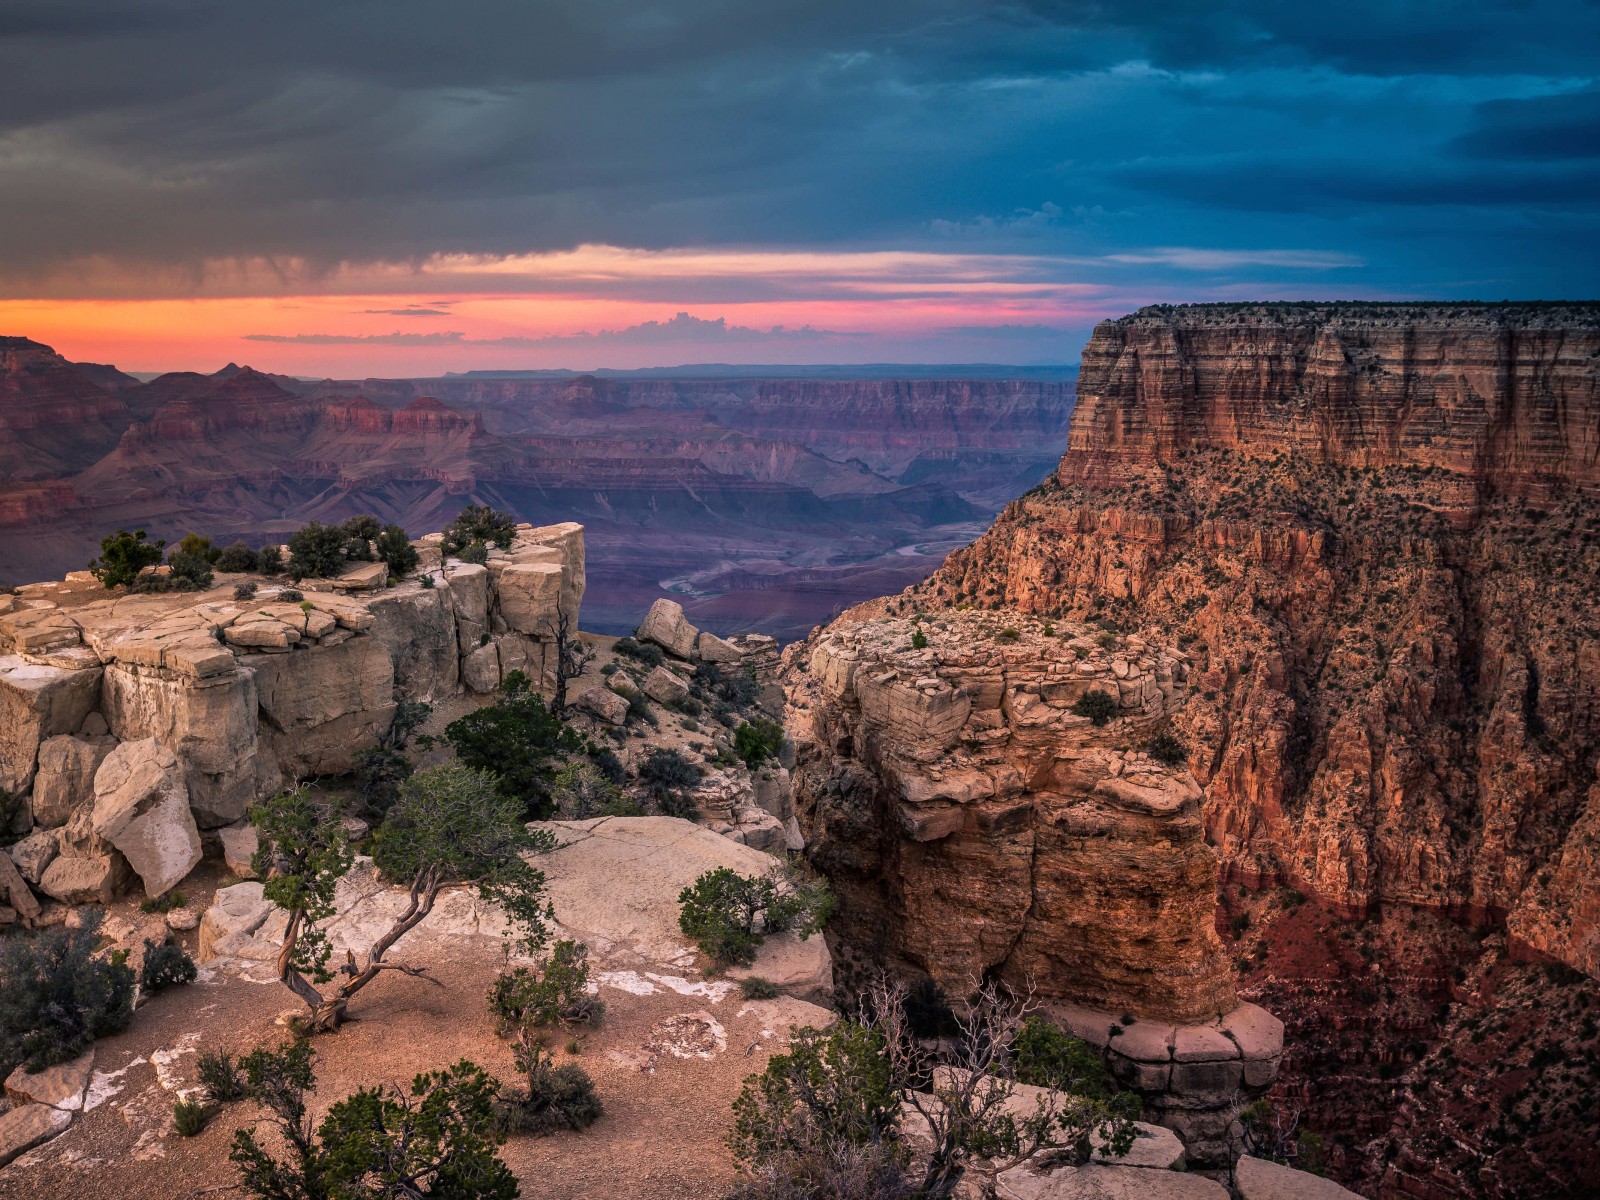 Sunset At The Grand Canyon Wallpaper for Desktop 1600x1200